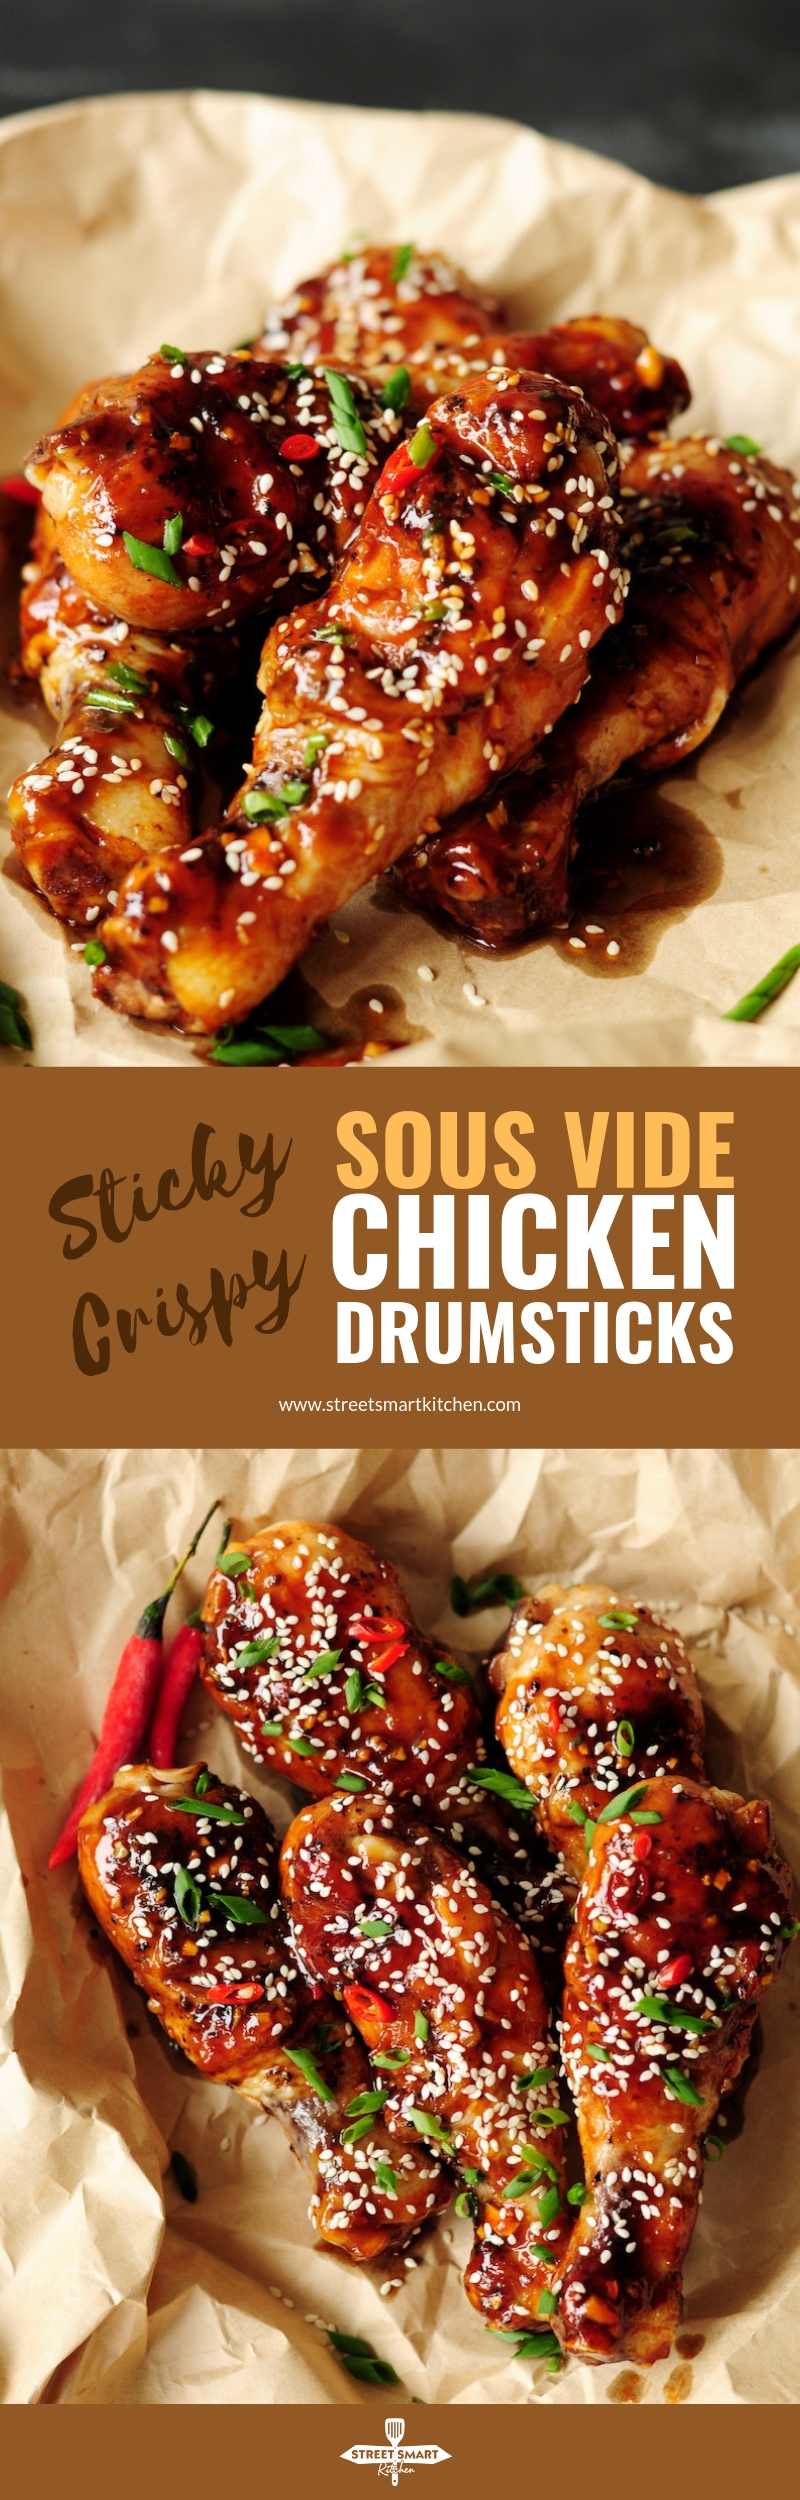 These Chinese-inspired sous vide chicken drumsticks are addictive in their own right, with each bite of tender, juicy meat and crispy skin.